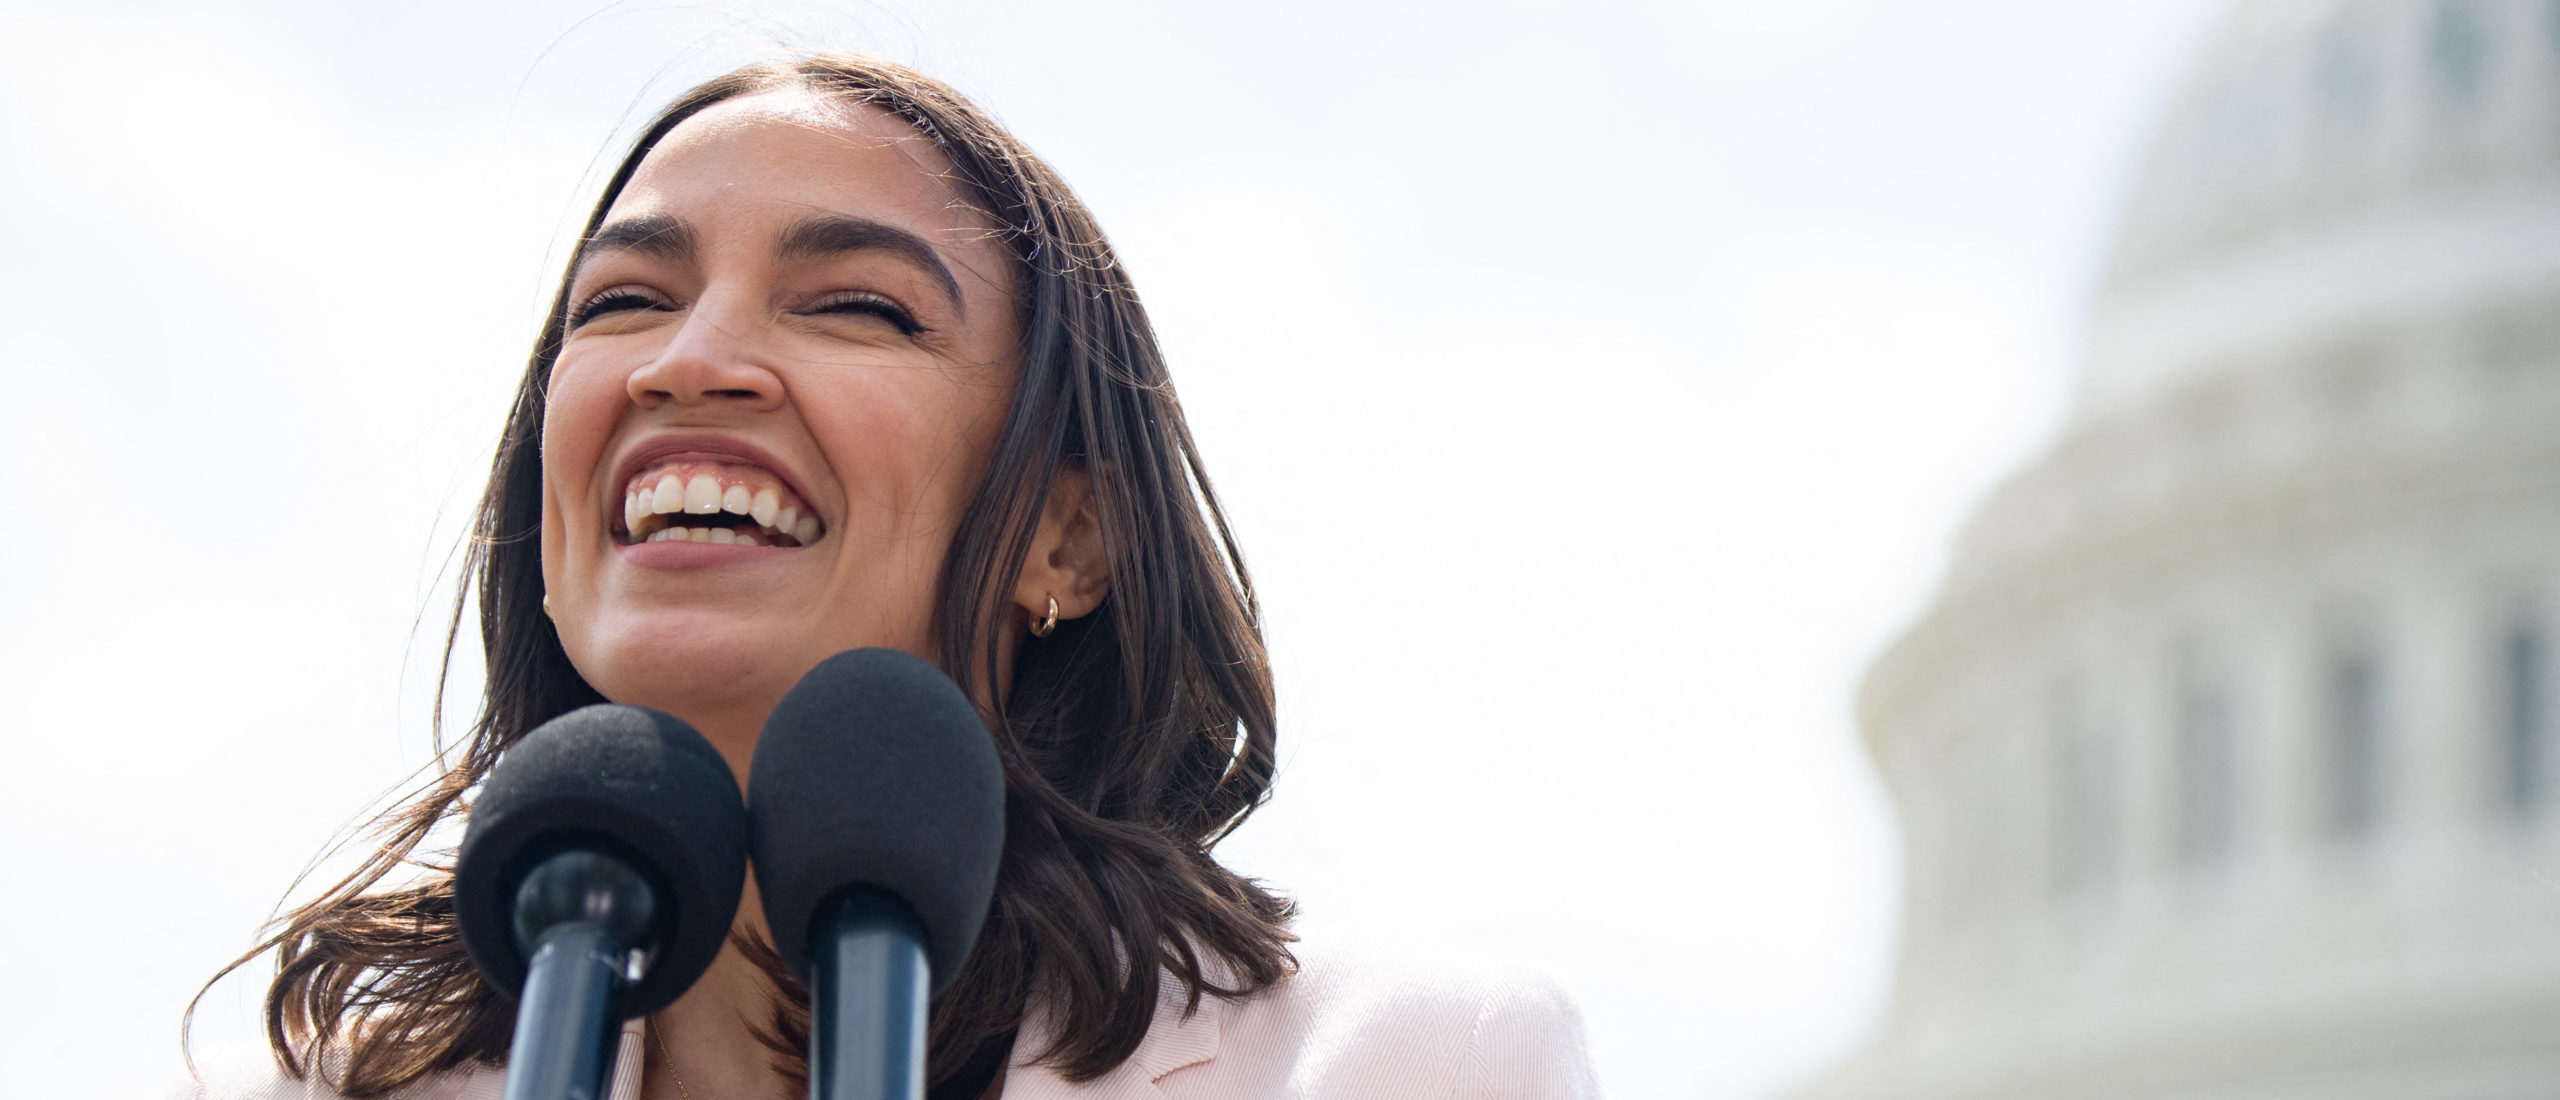 US Representative Alexandria Ocasio-Cortez, Democrat of New York, attends a press conference about a postal banking pilot program outside the US Capitol in Washington, DC, April 15, 2021. (Photo by SAUL LOEB / AFP) (Photo by SAUL LOEB/AFP via Getty Images)